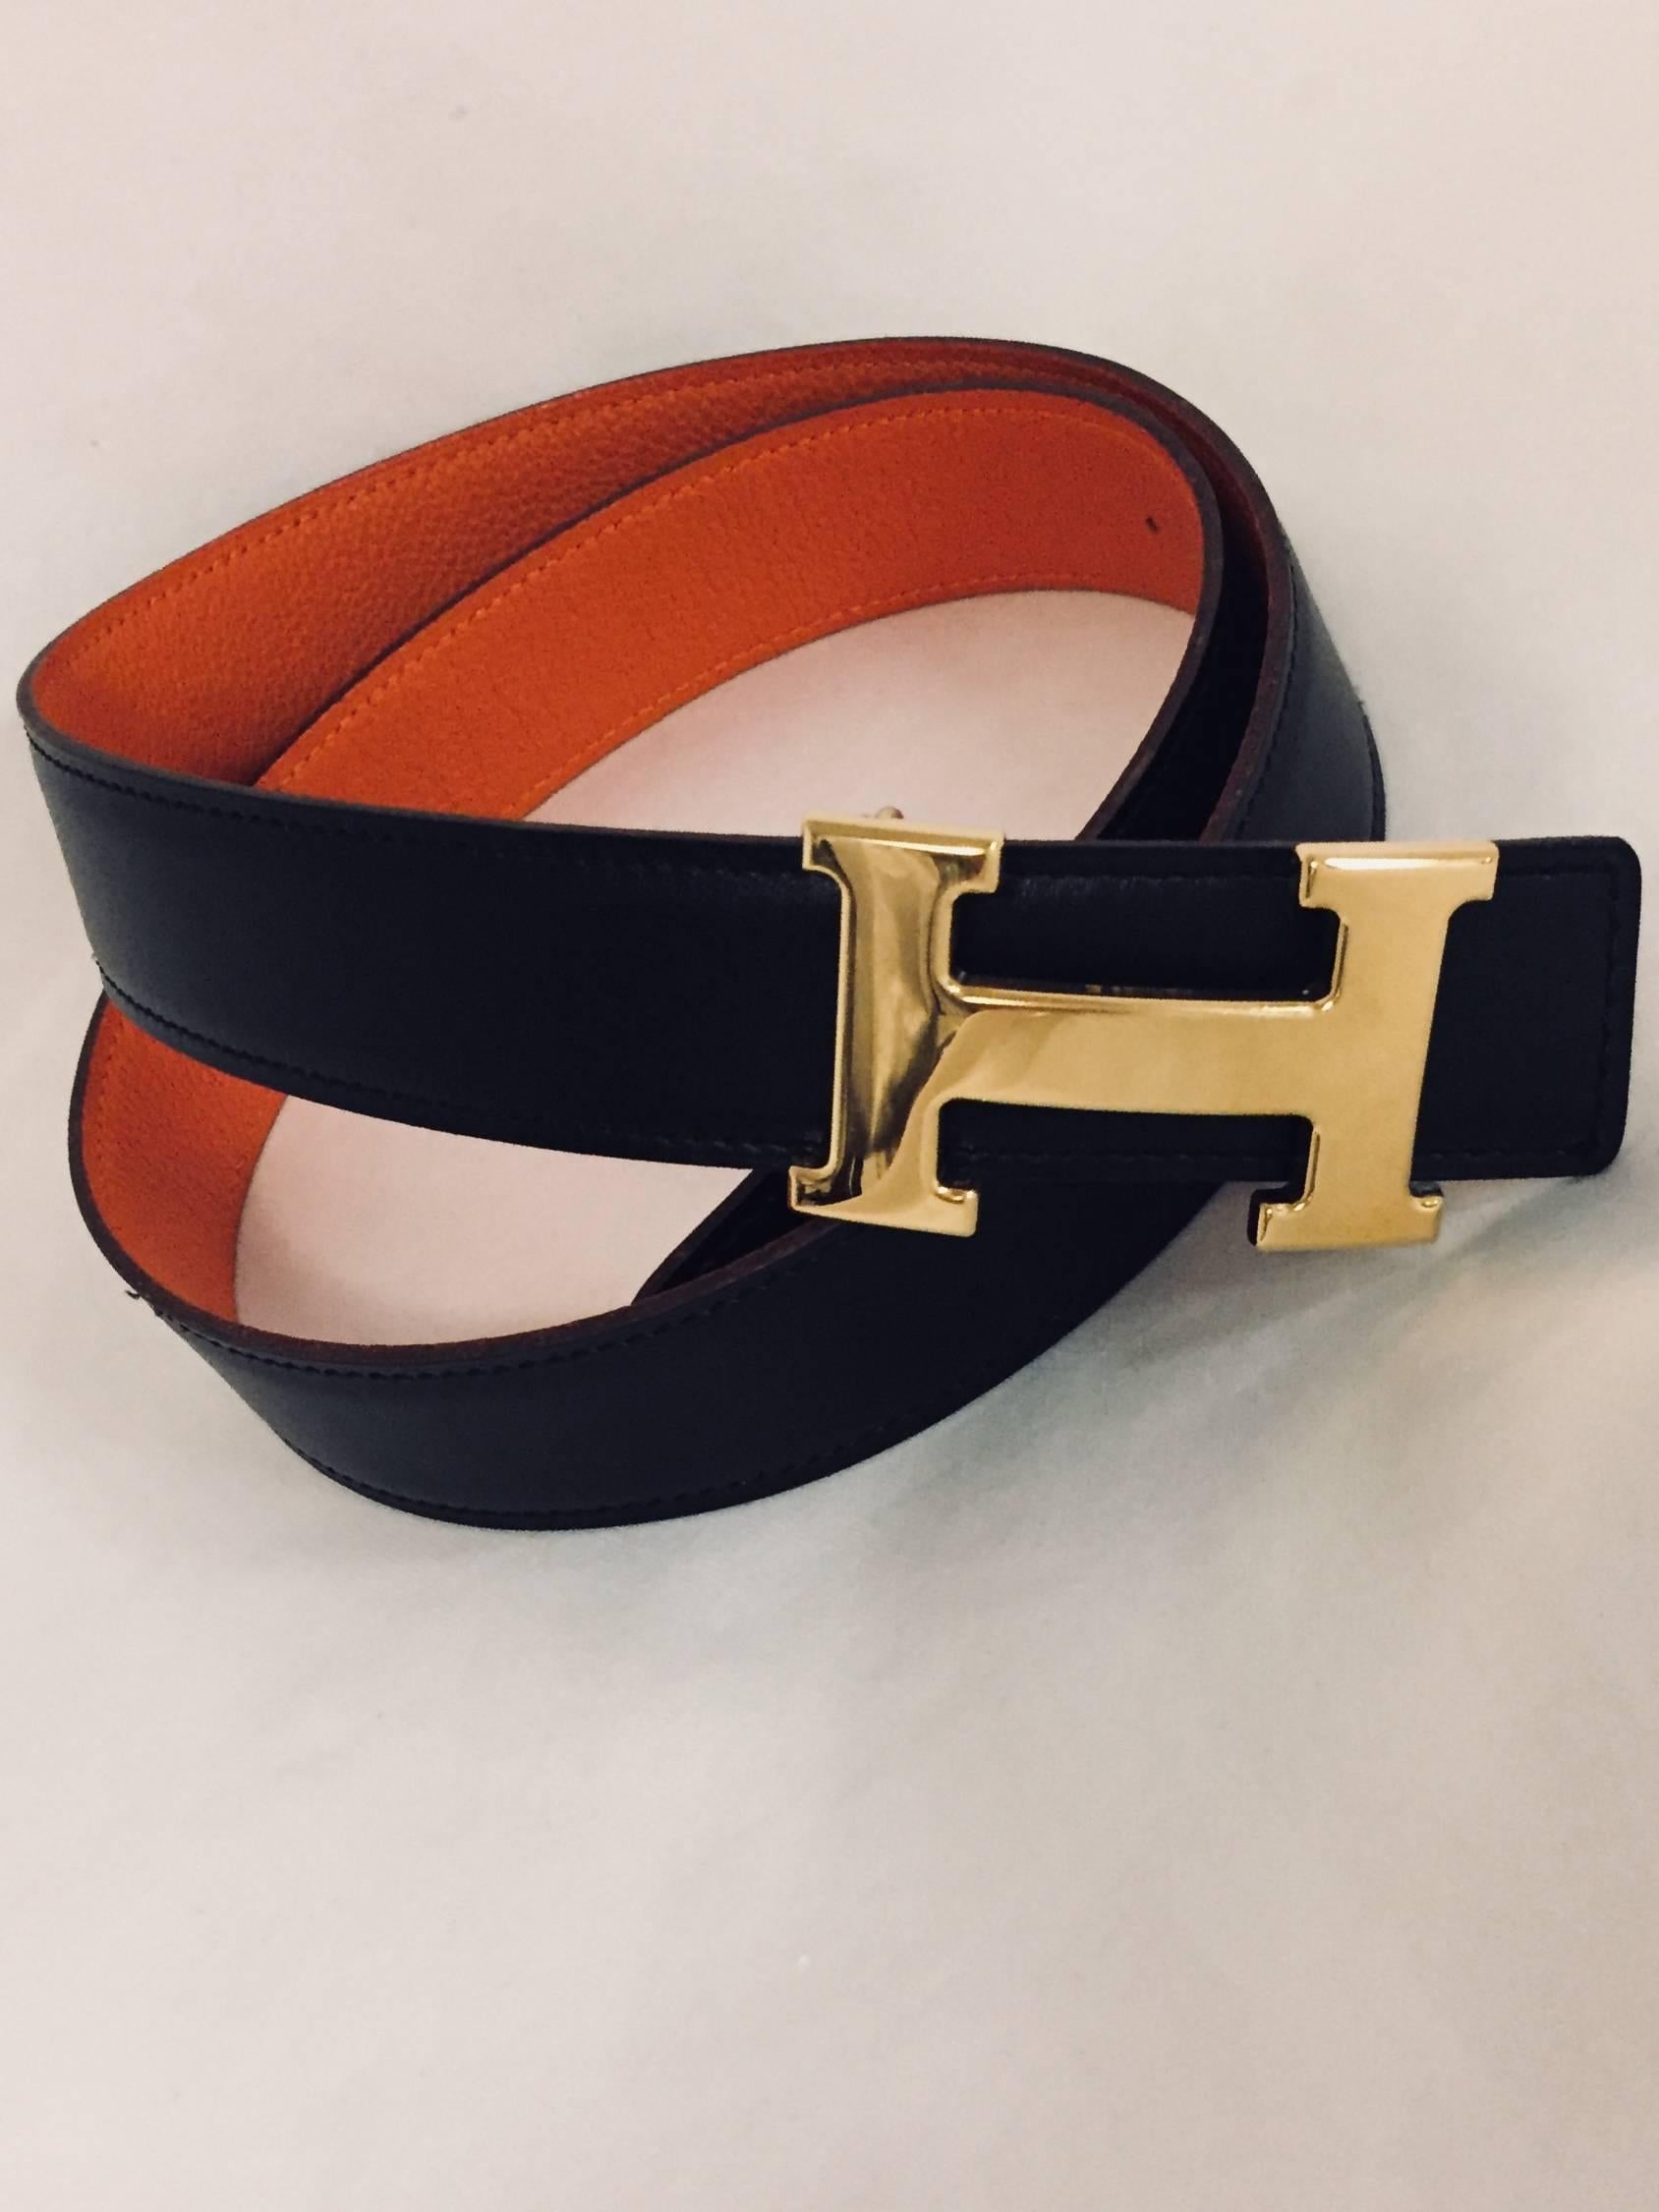 Fit for any fashionista, Hermes “Constance” belt set is highly desired and coveted!  Set features reversible signature Orange Togo and black smooth leather belt and gold tone ”H” buckle. An amazing combination that is sure to please the most